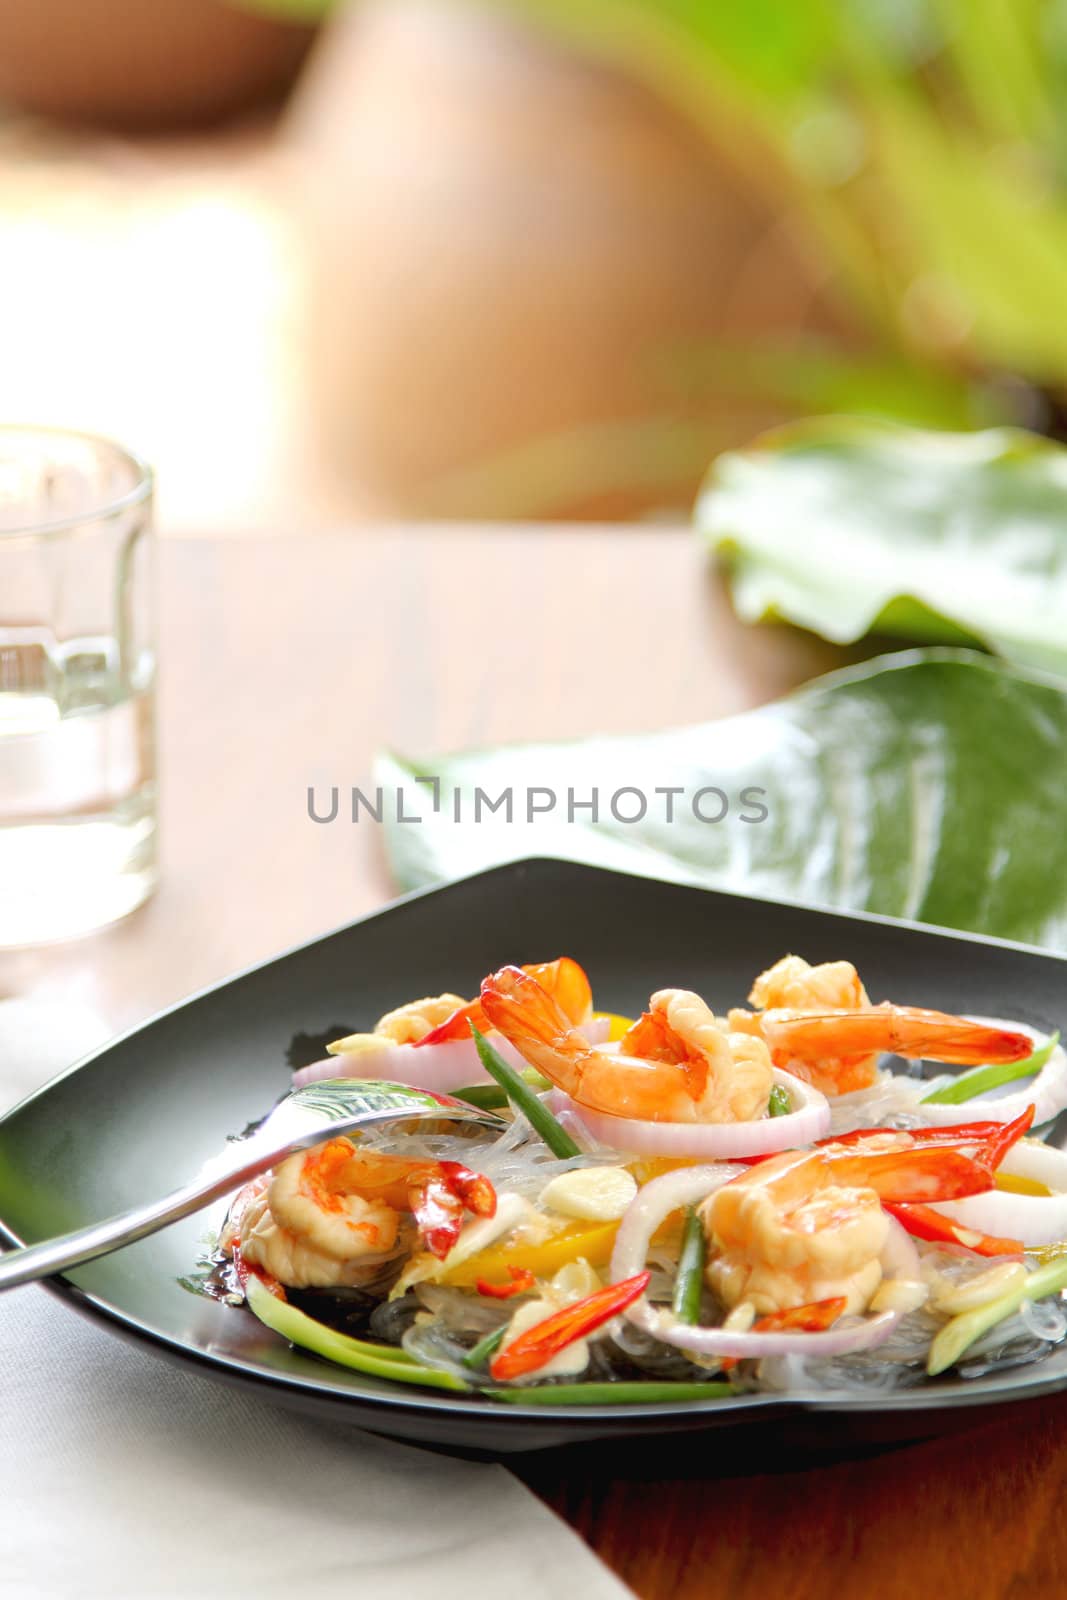 Sour & spicy vermicelli salad with prawn by vanillaechoes